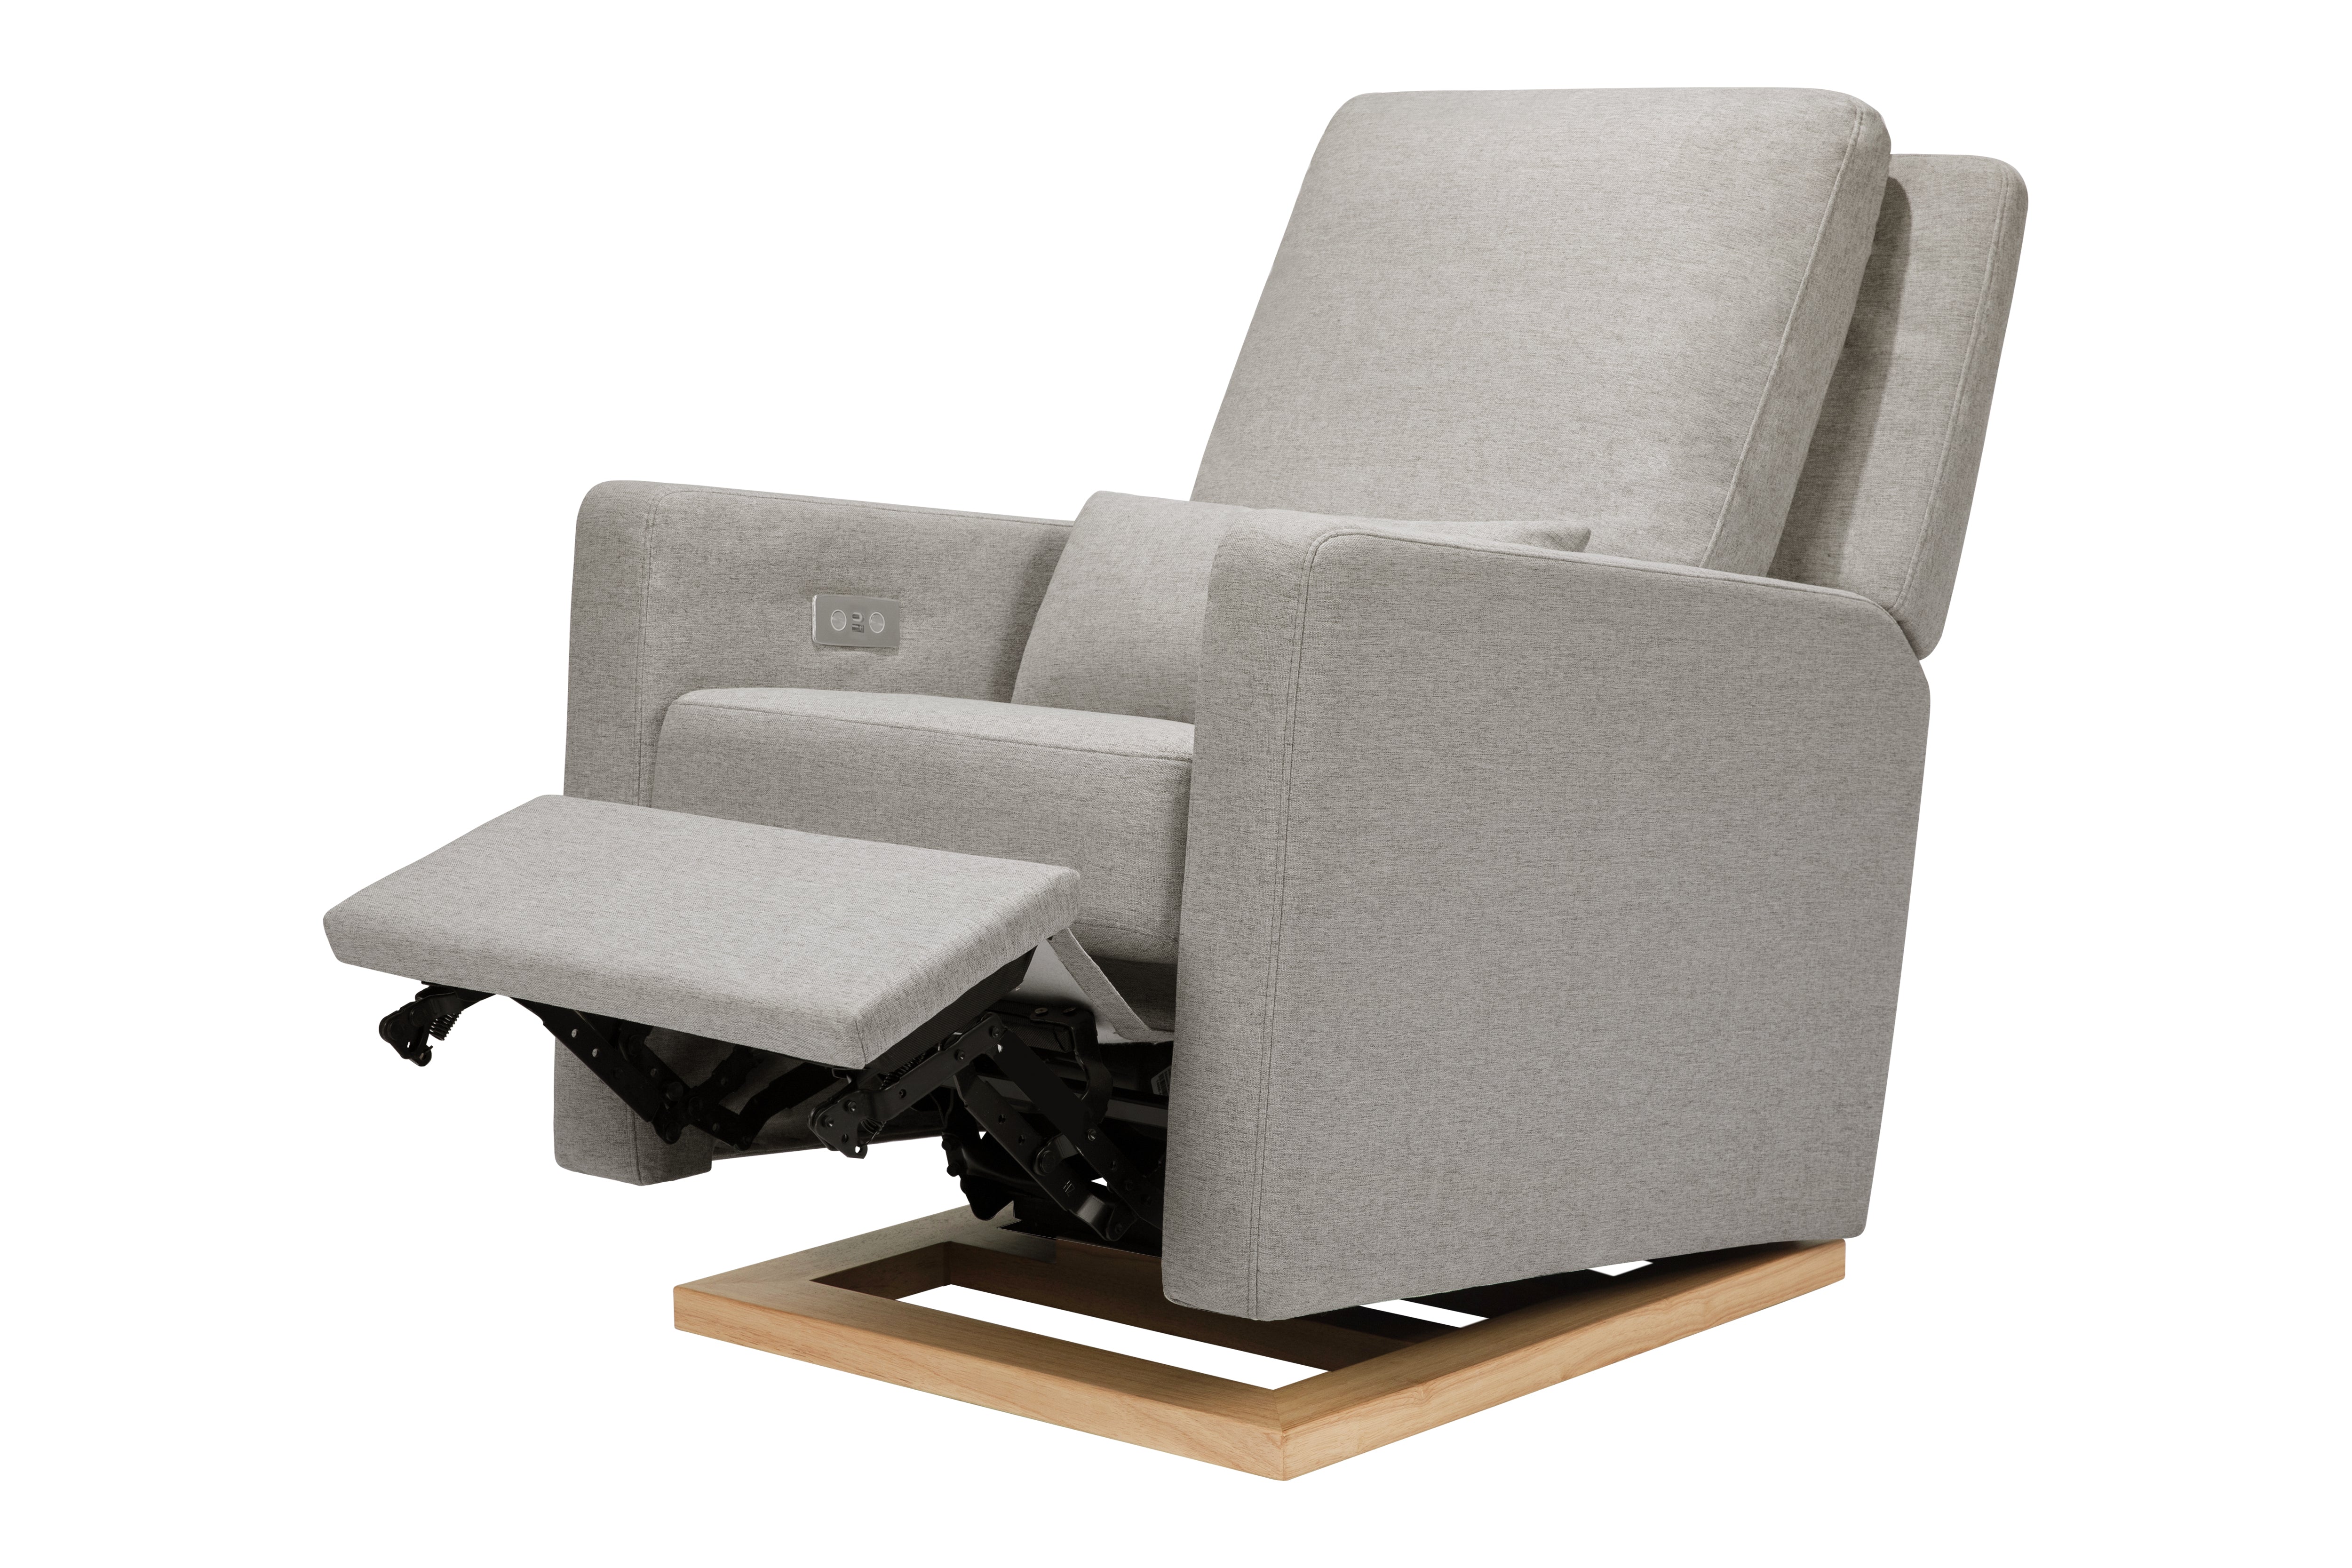 Sigi Electronic Recliner and Glider in Performance Grey Eco-Weave with Light Wood Base - Twinkle Twinkle Little One